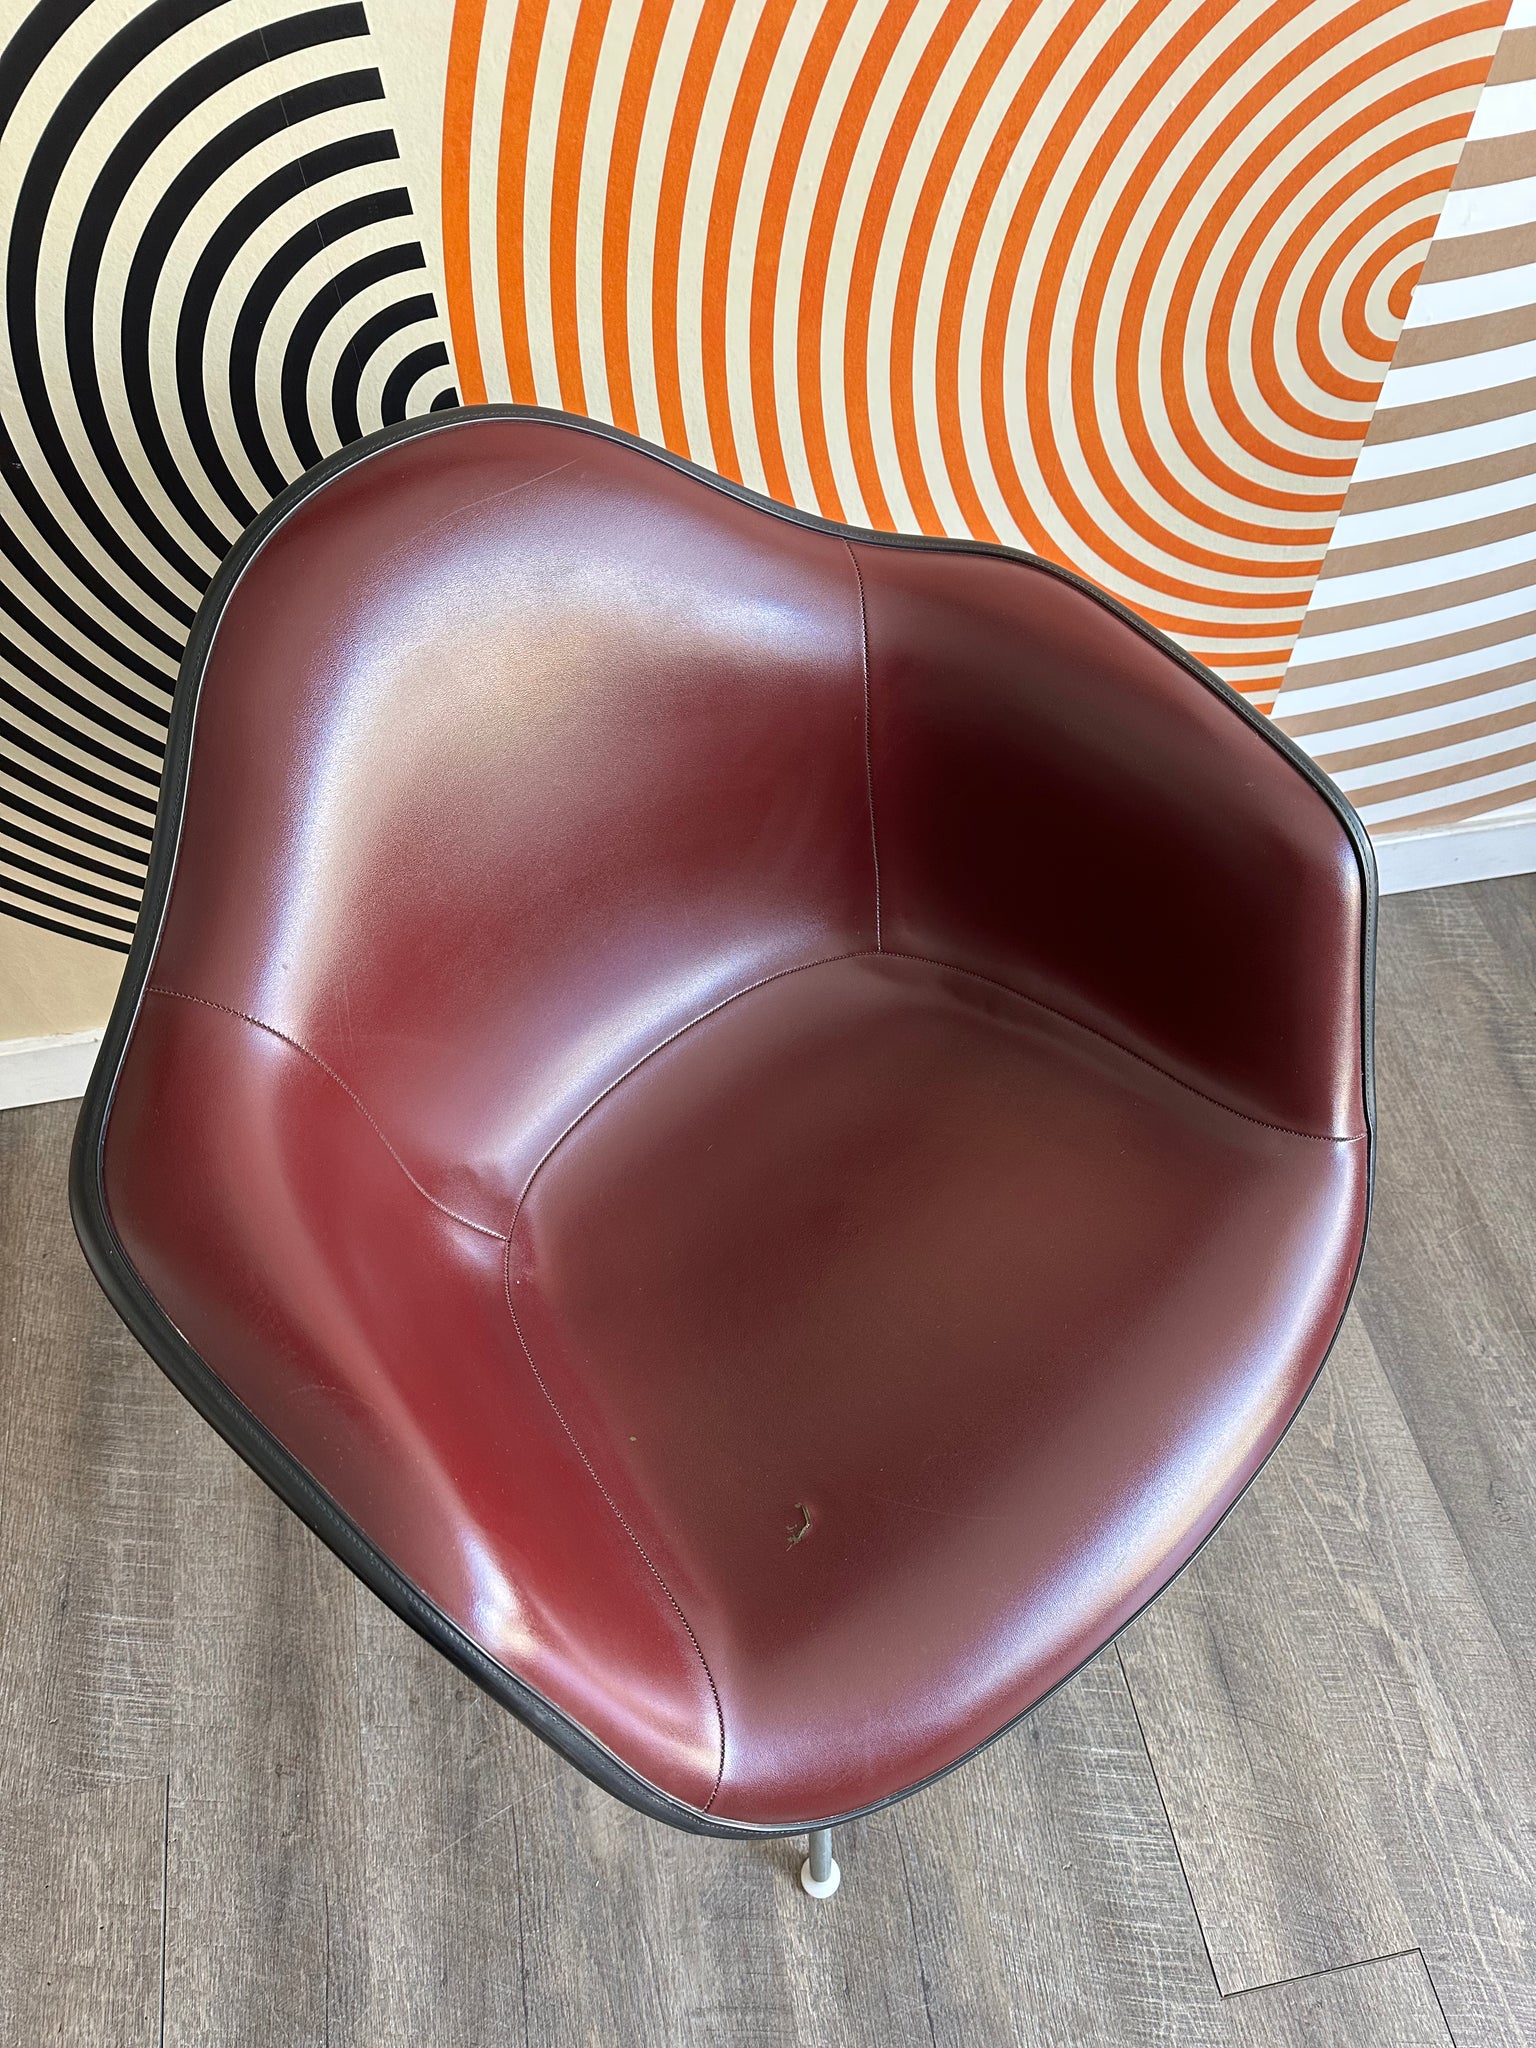 Vintage “DAX” Armchair by Charles and Ray Eames for Herman Miller